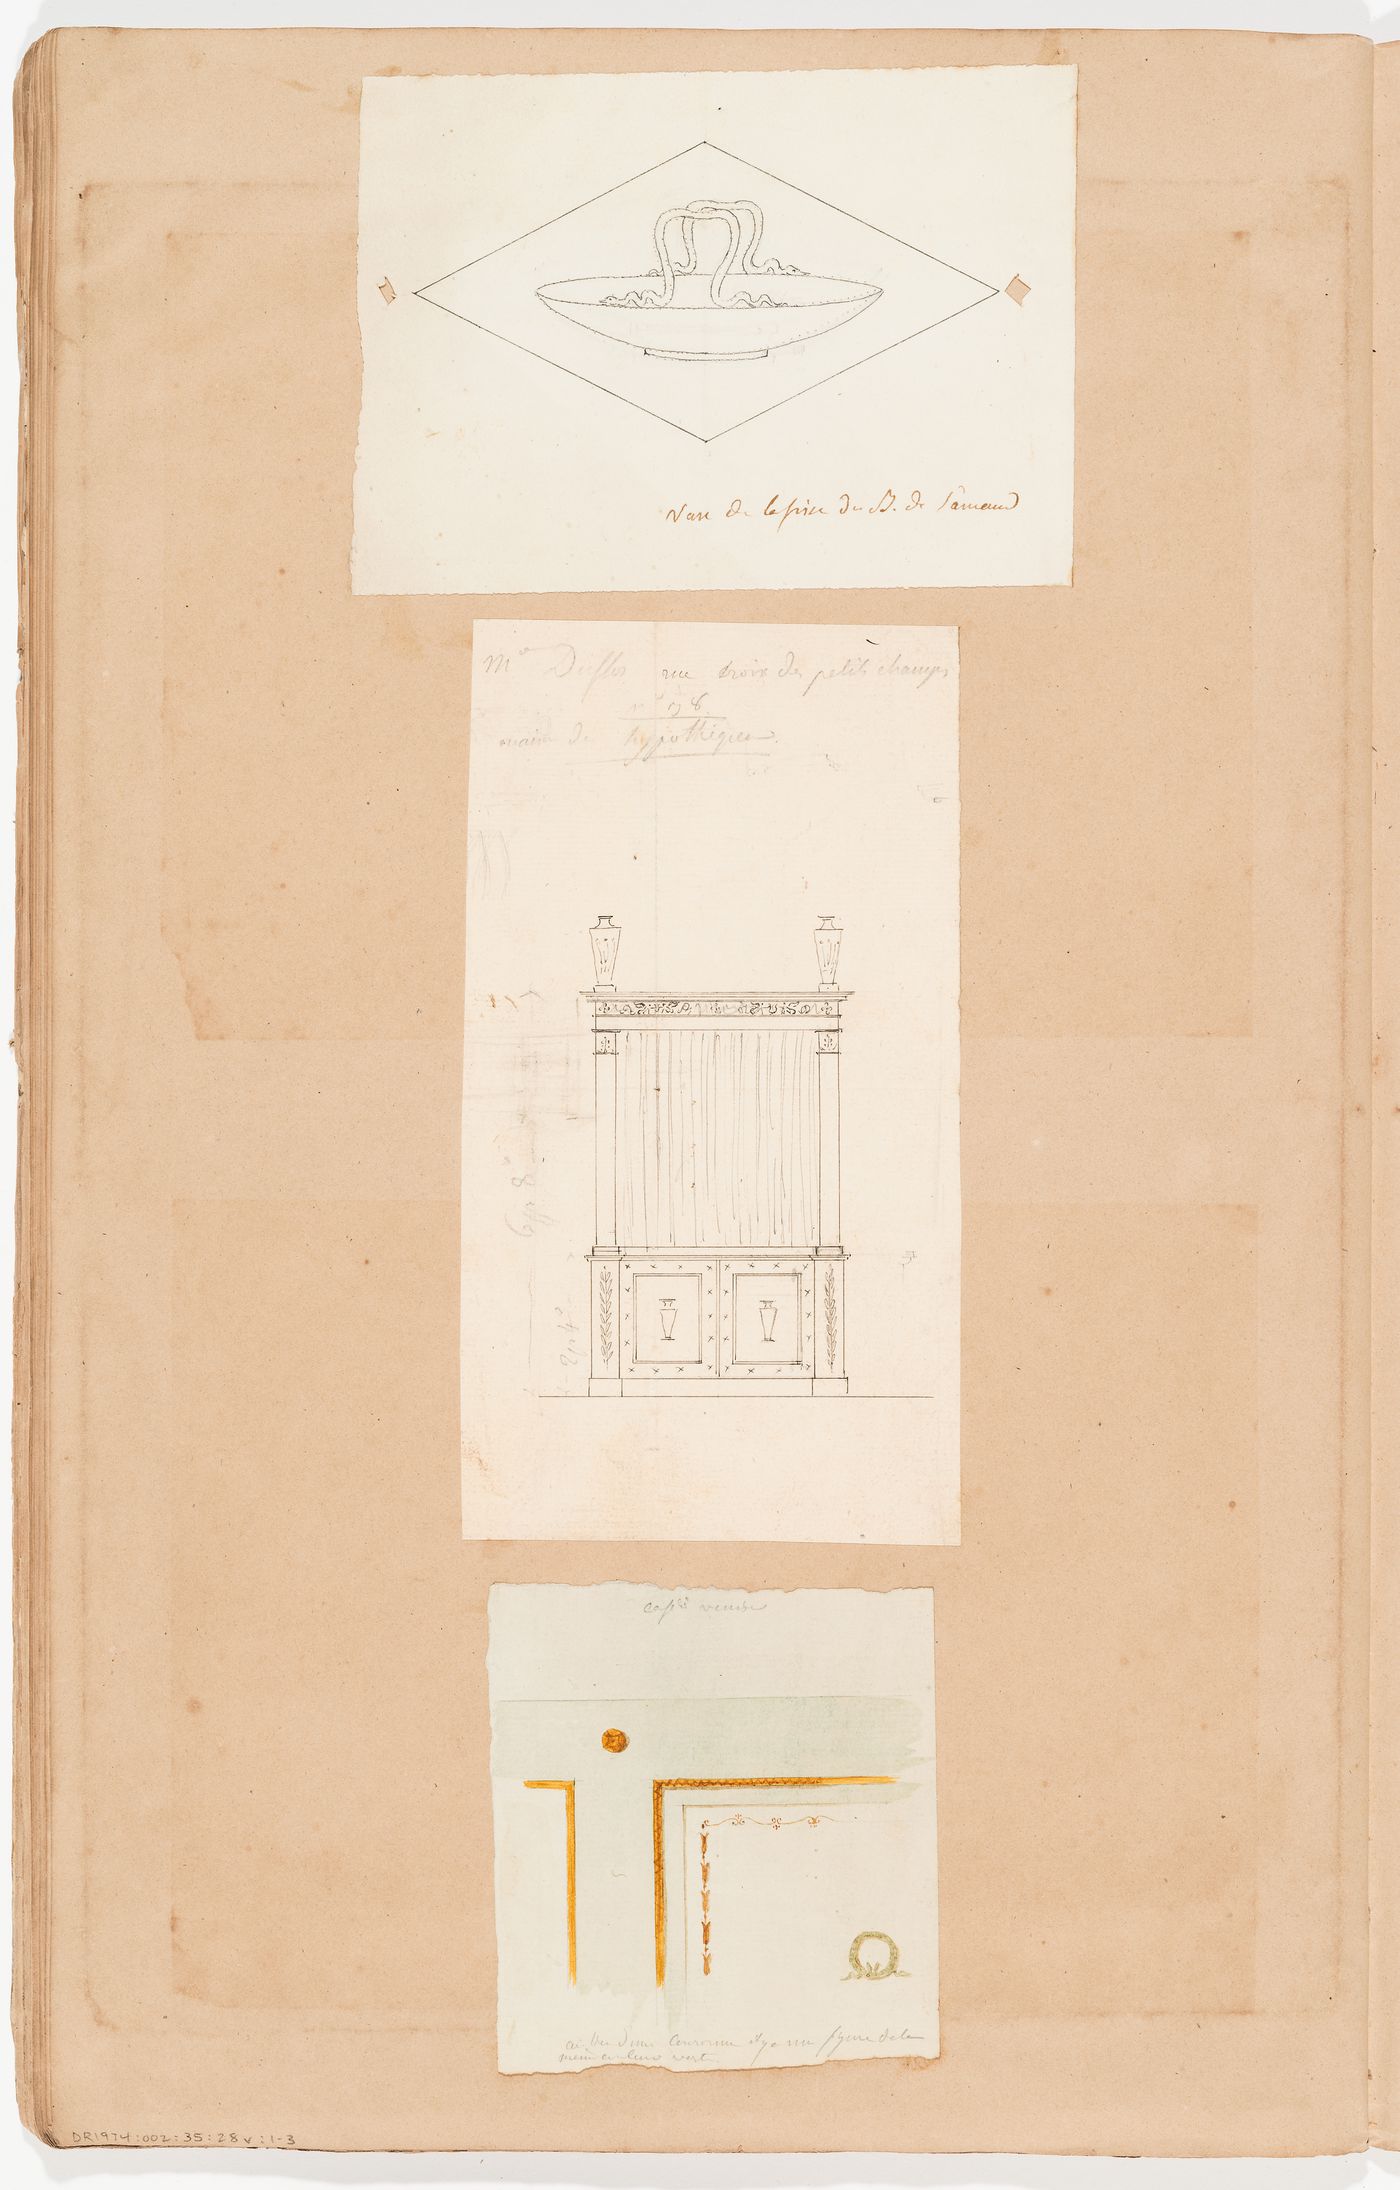 Plans for an unidentified house; verso: Drawing for an ornament detail or trophy, elevation, probably for a cabinet, and detail for the decoration of an interior wall